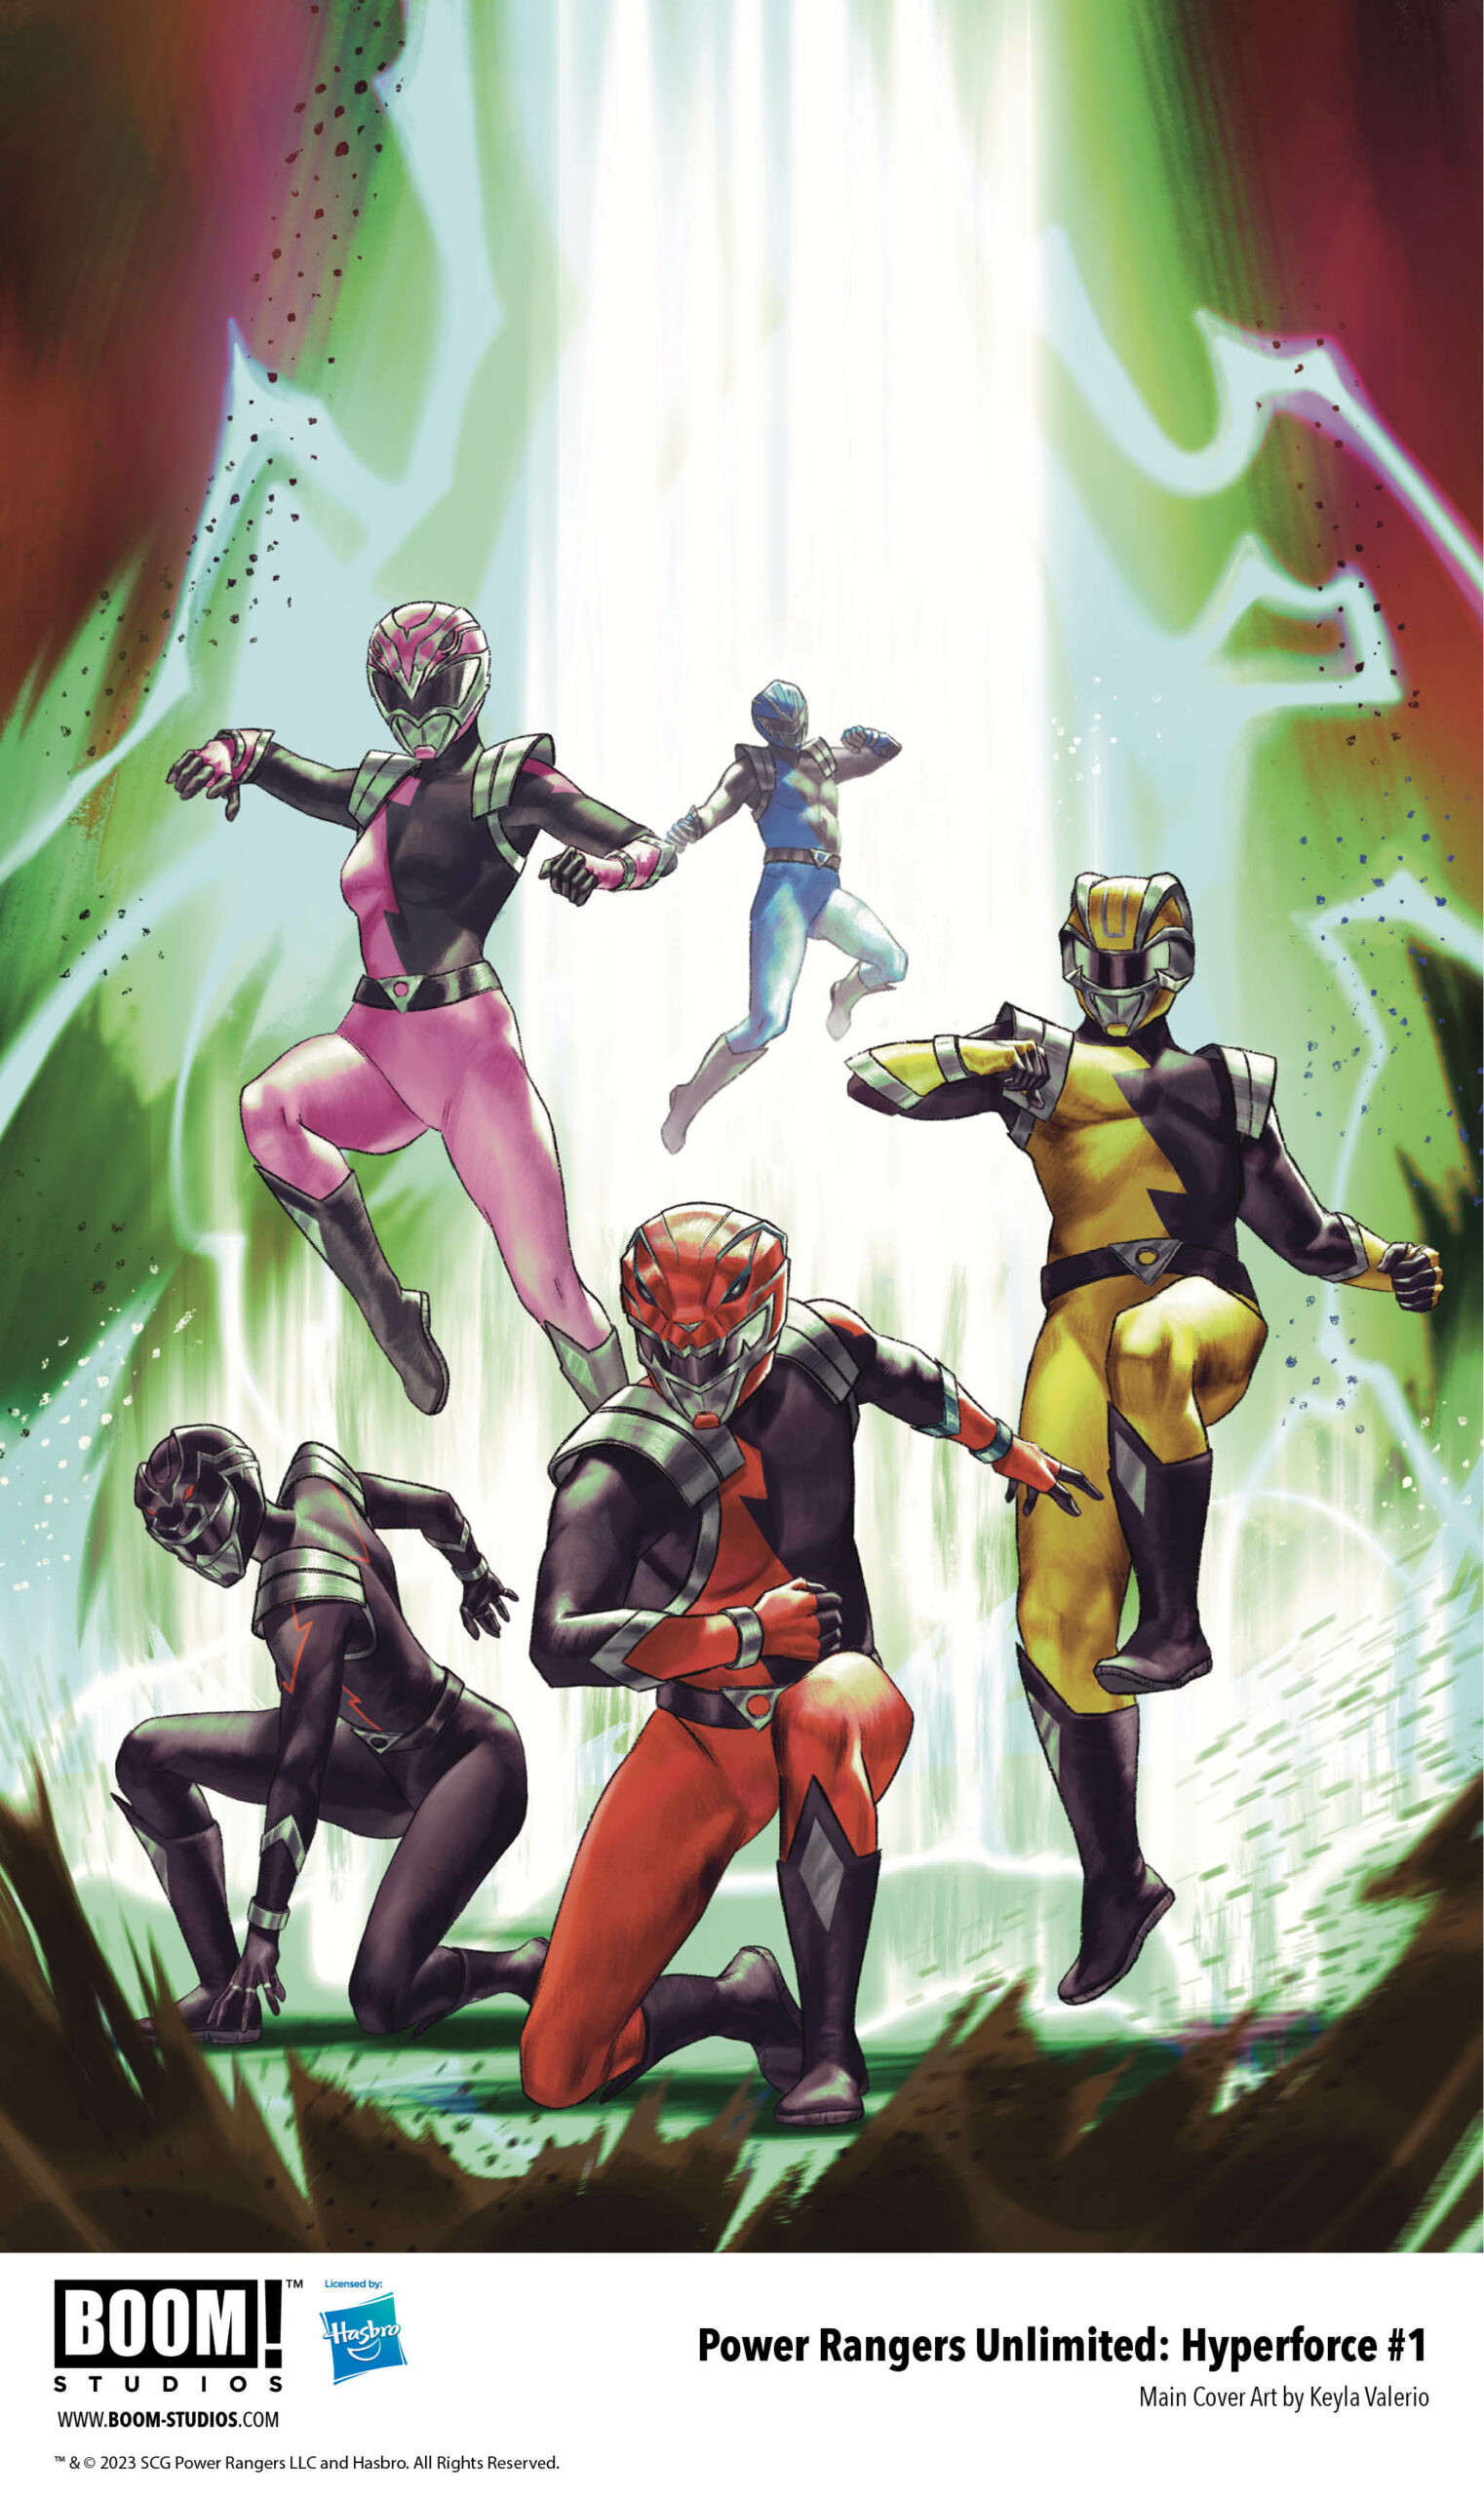 PowerRangers_Unlimited_HyperForce_001_Cover_A_Main_PROMO-1-scaled.jpg